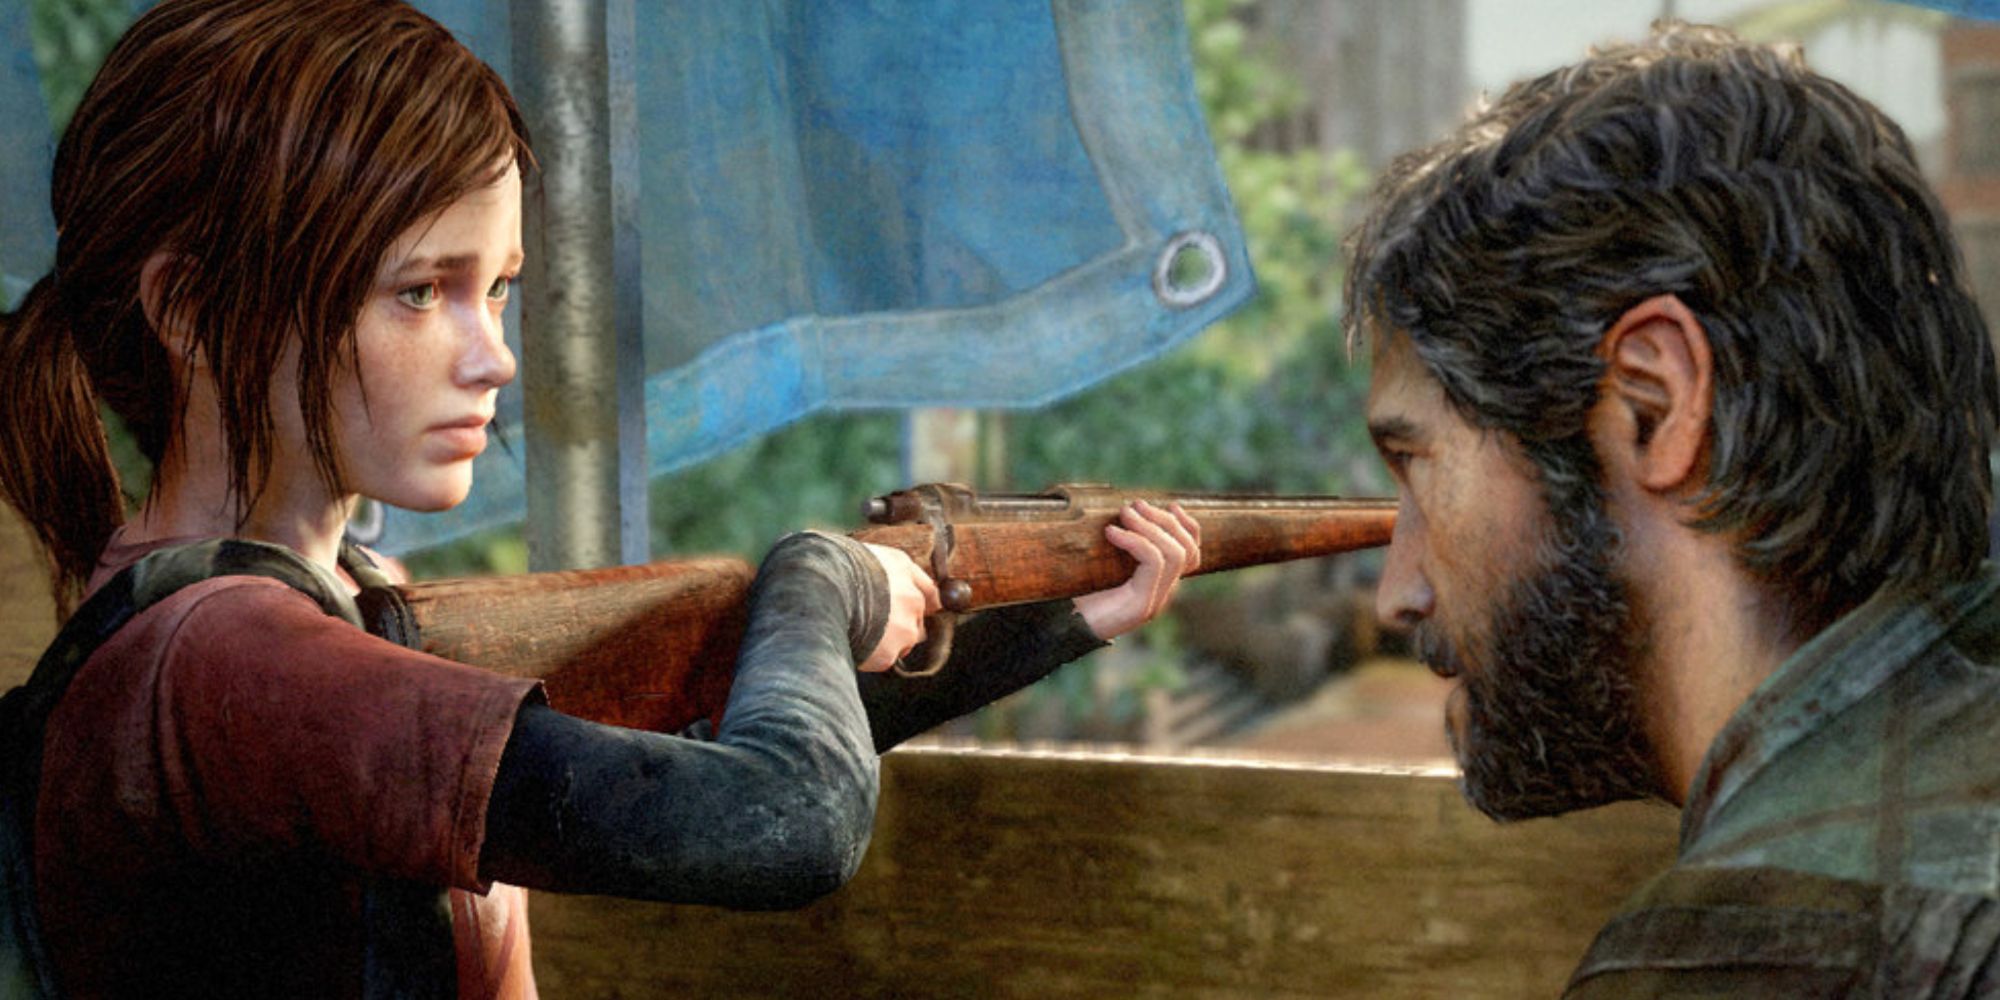 Joel looking at Ellie holding and pointing a rifle in The Last of Us